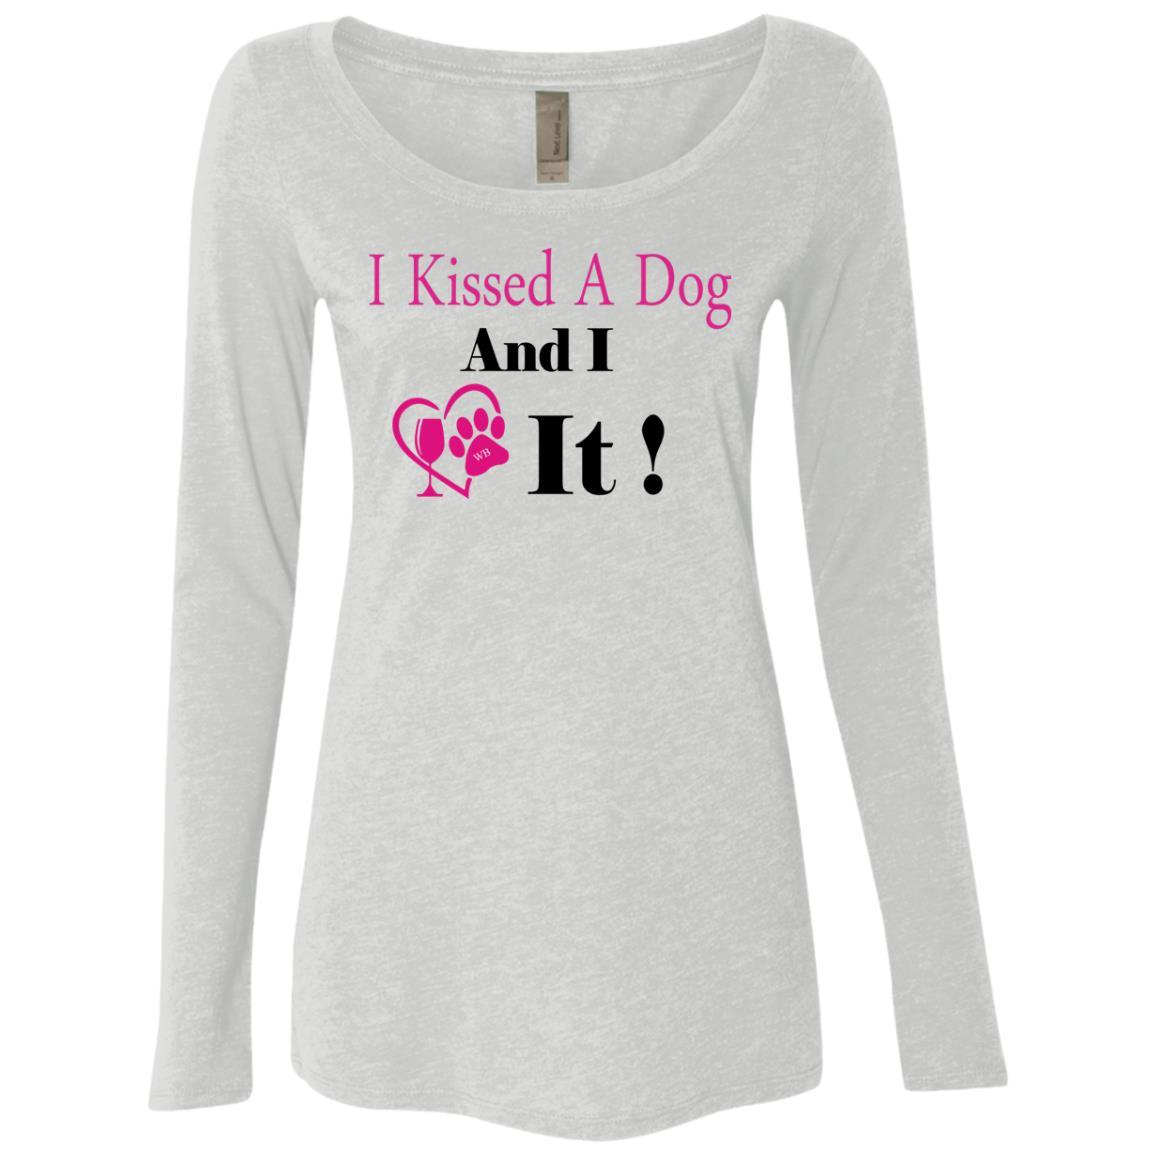 T-Shirts Heather White / S WineyBitches.co "I Kissed A Dog And I Loved It:" Ladies' Triblend LS Scoop WineyBitchesCo